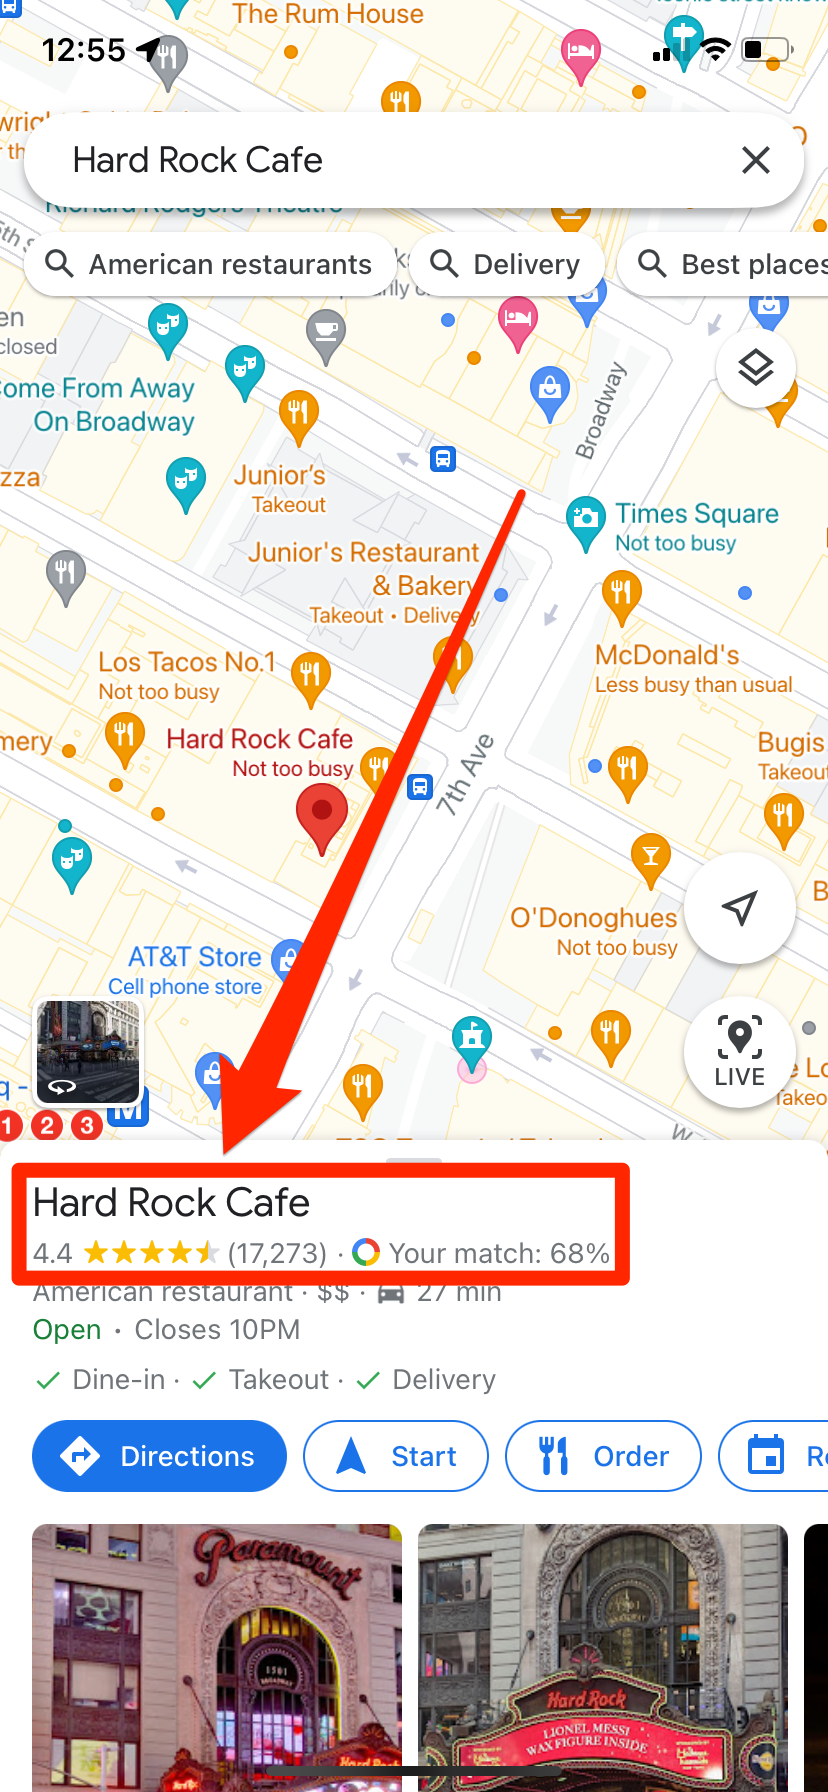 The Google Maps info page for Hard Rock Cafe.